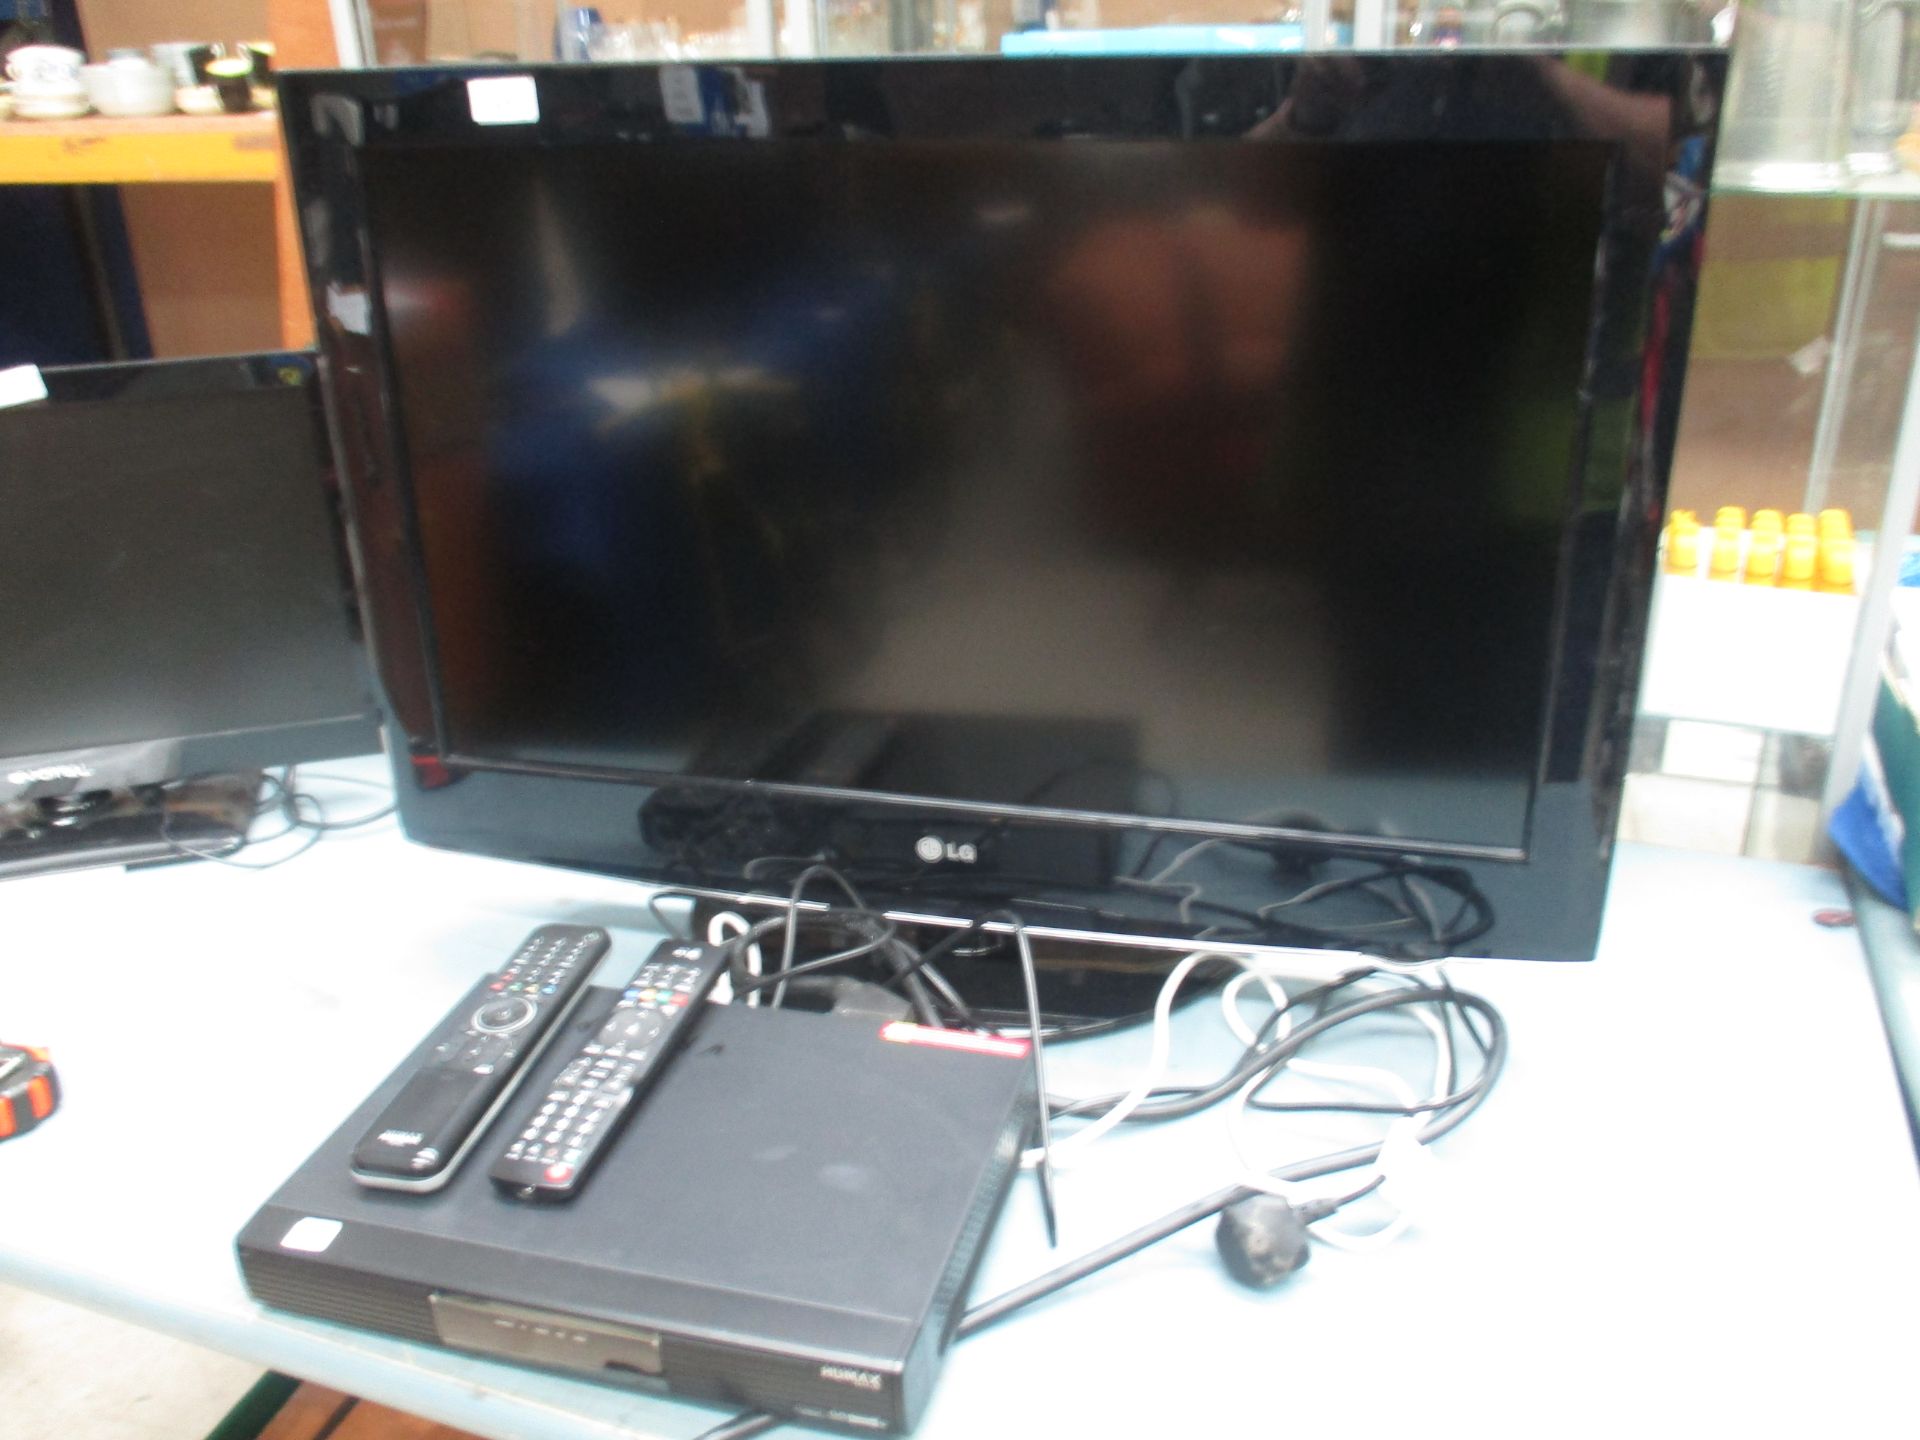 An LG 32" 32LD 420 flat screen TV complete with remote control and a Humax PVR-9150T freeview box